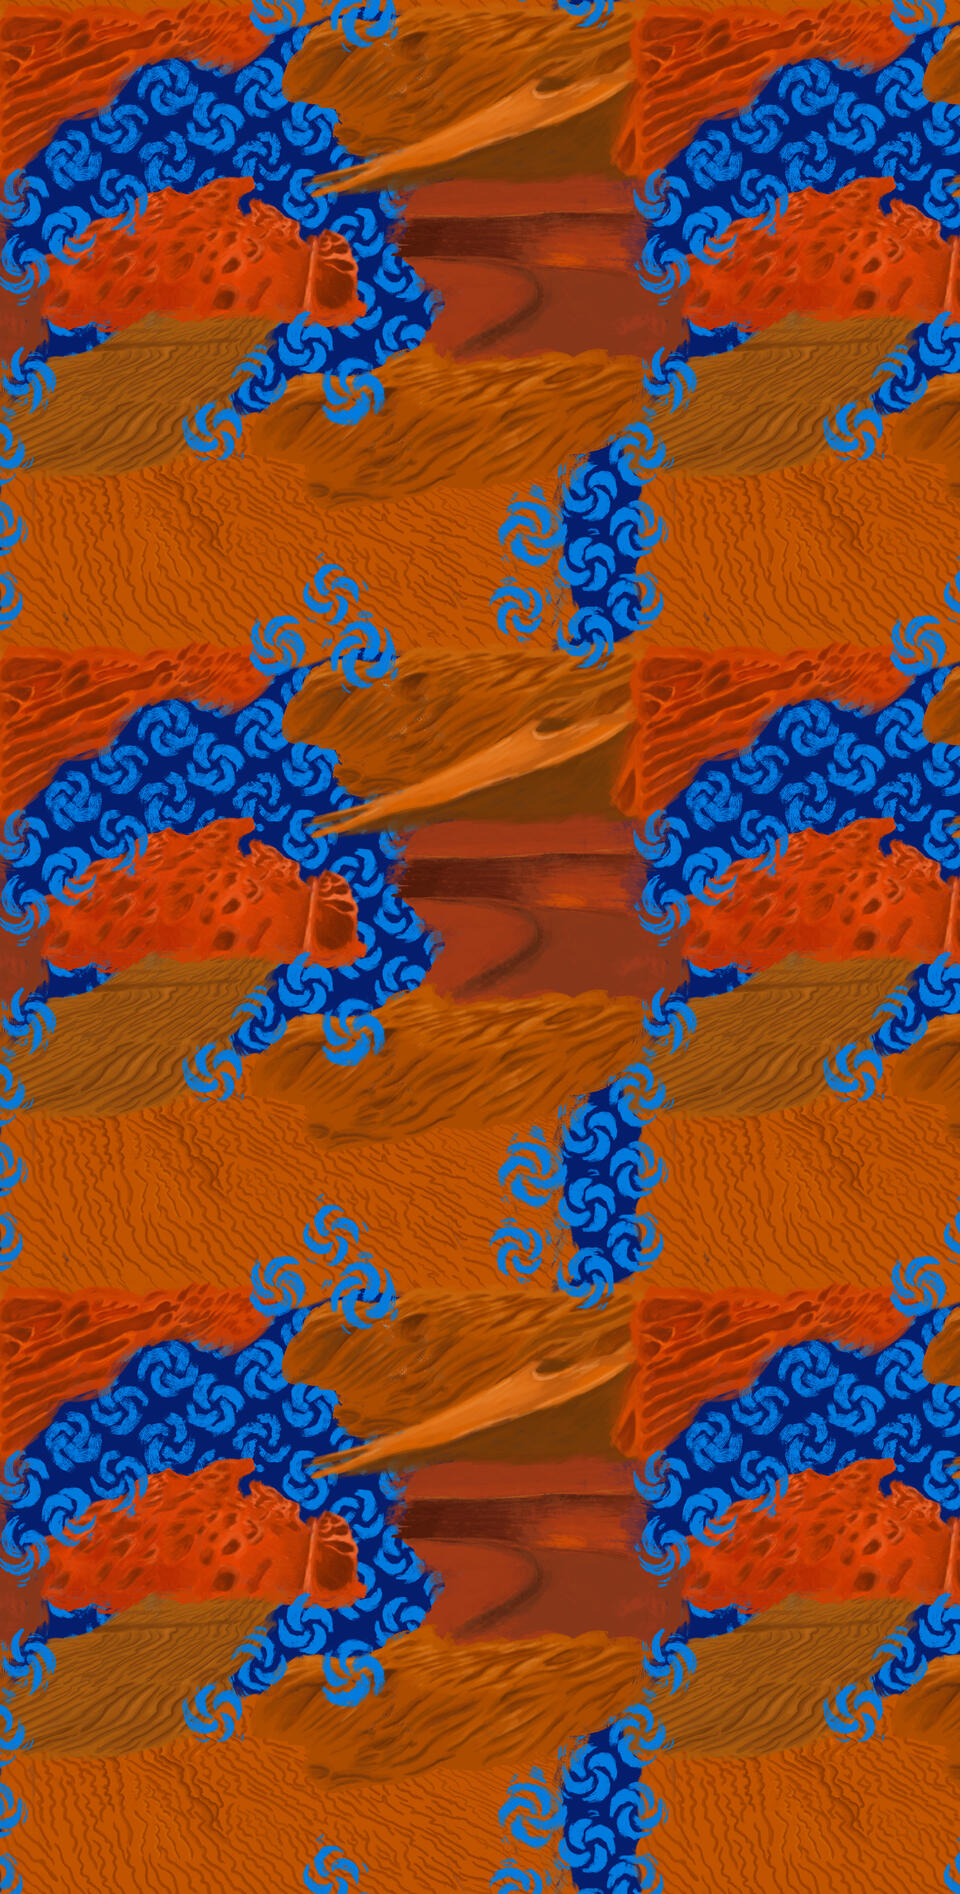 collaged desert dunes and sand in different earth tones overlapping each other, with patches of  ultramarine blue inbetween with light blue spirals on top. Tiled in repeating pattern in half drop